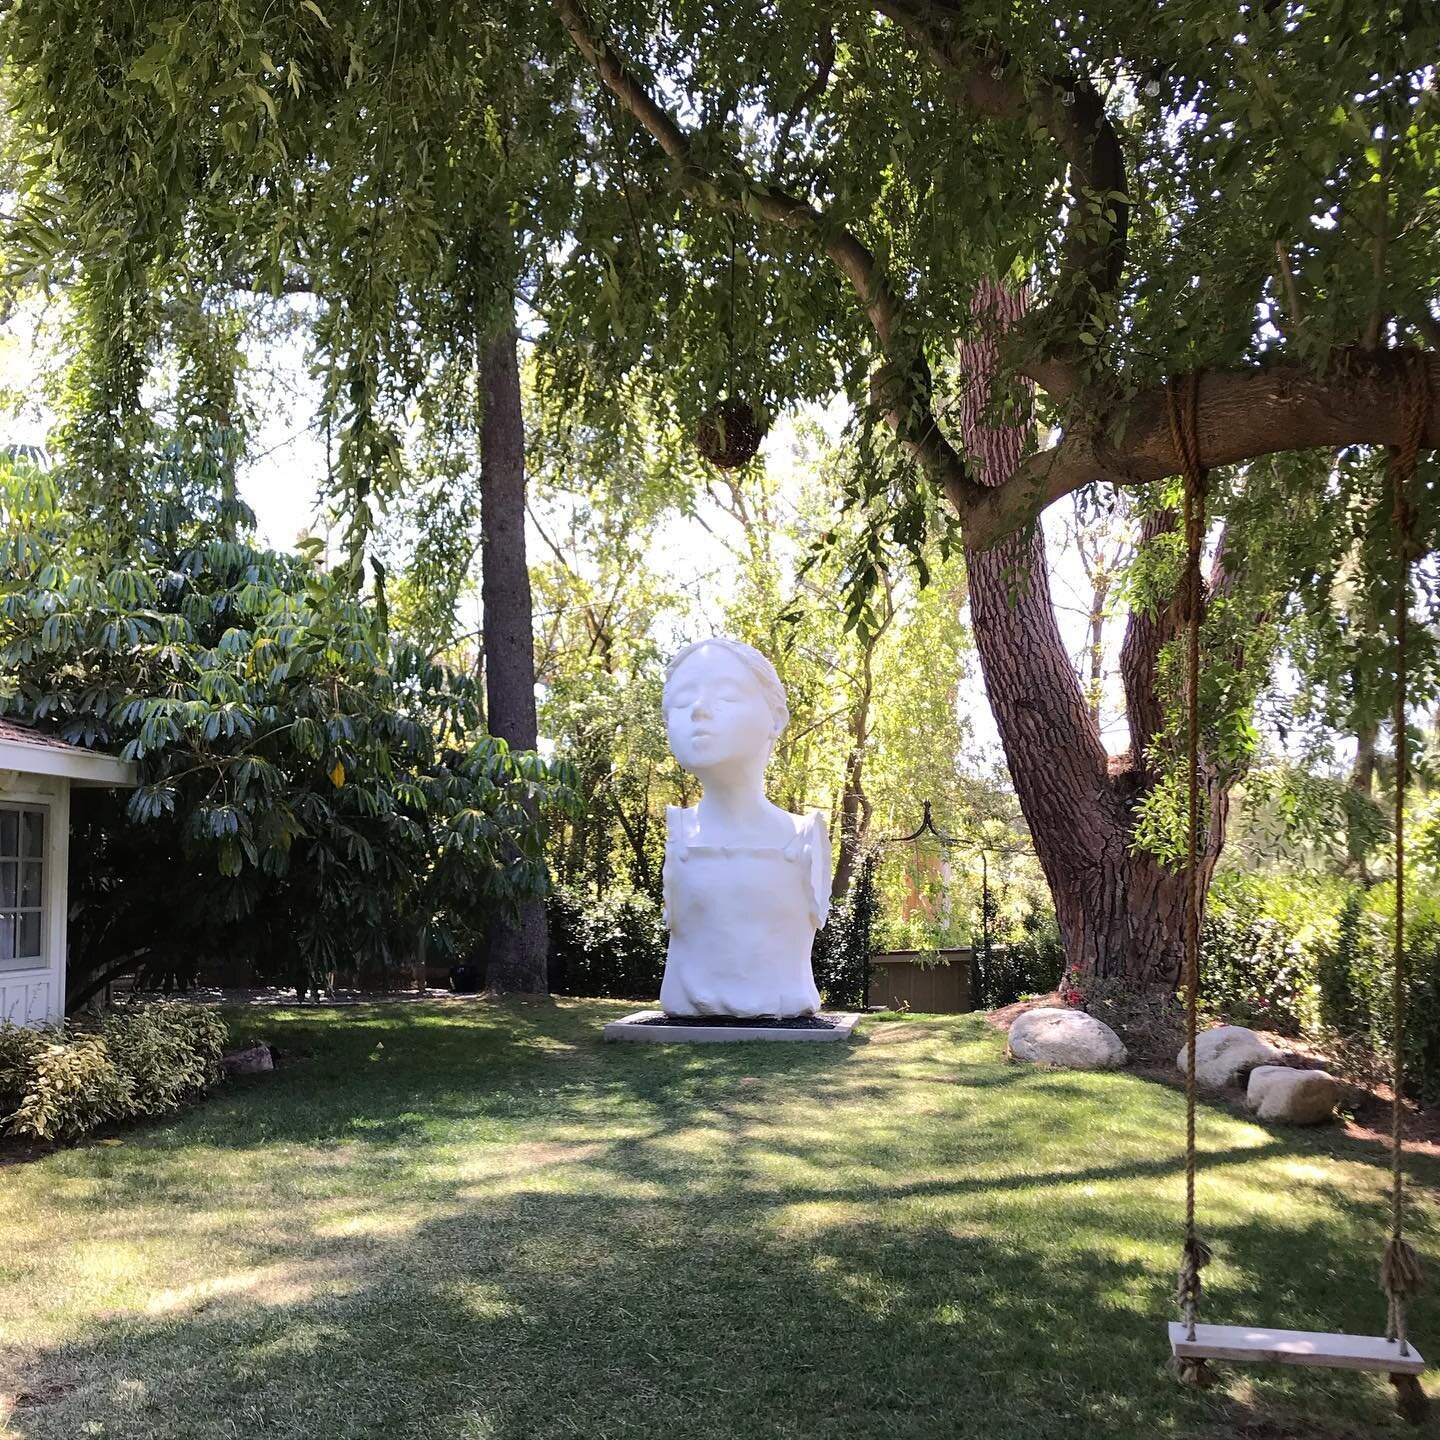 Imagine this view greets you every day&hellip; The Well by @studioenriquemartinezcelaya 

I had the pleasure of bringing my first art group to Enrique&rsquo;s private residence and the experience did not disappoint! Thank you @spolinger for bringing 